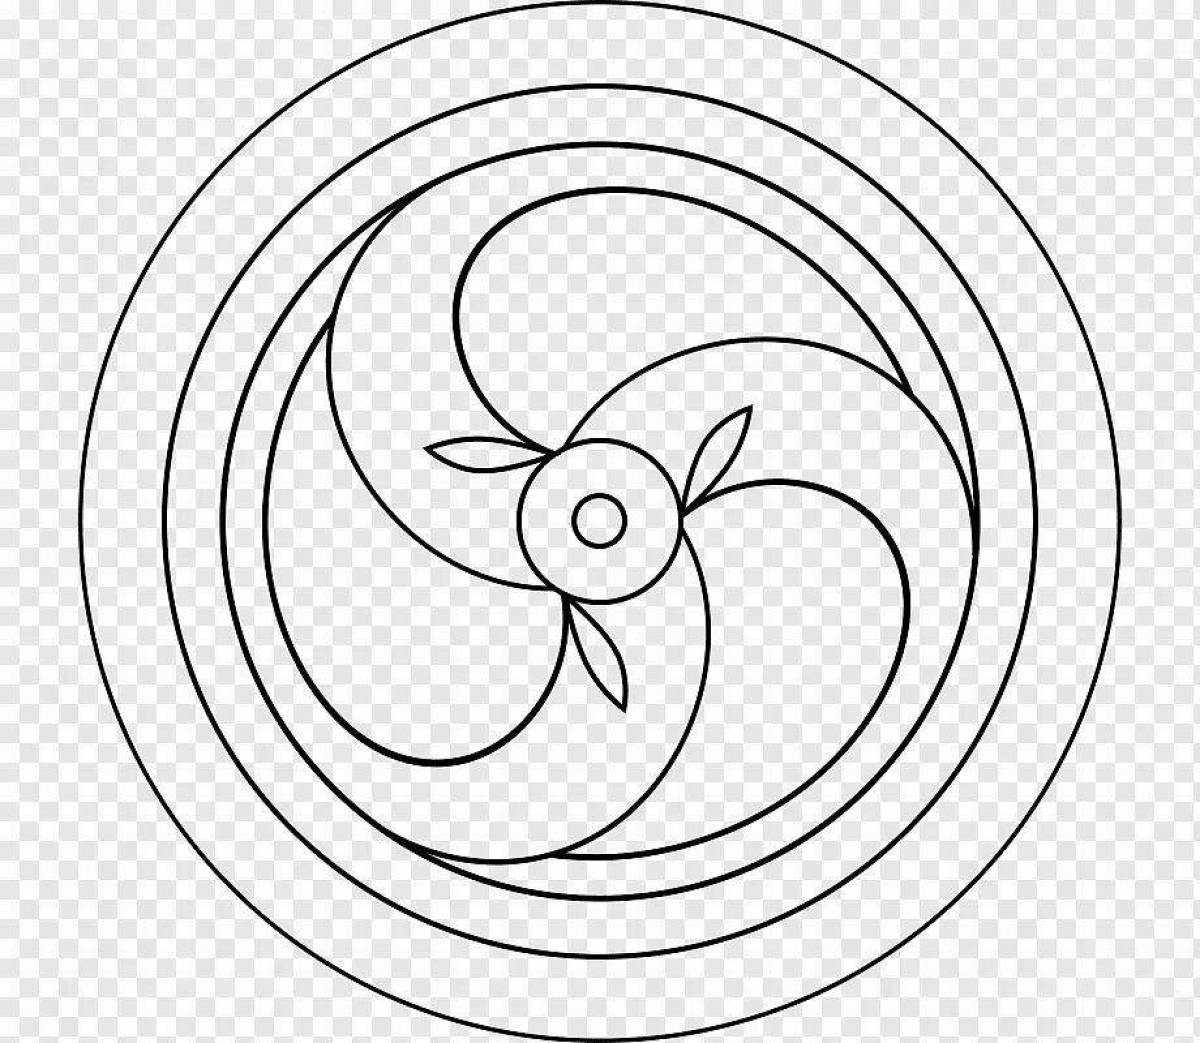 Unique spiral in circle coloring page